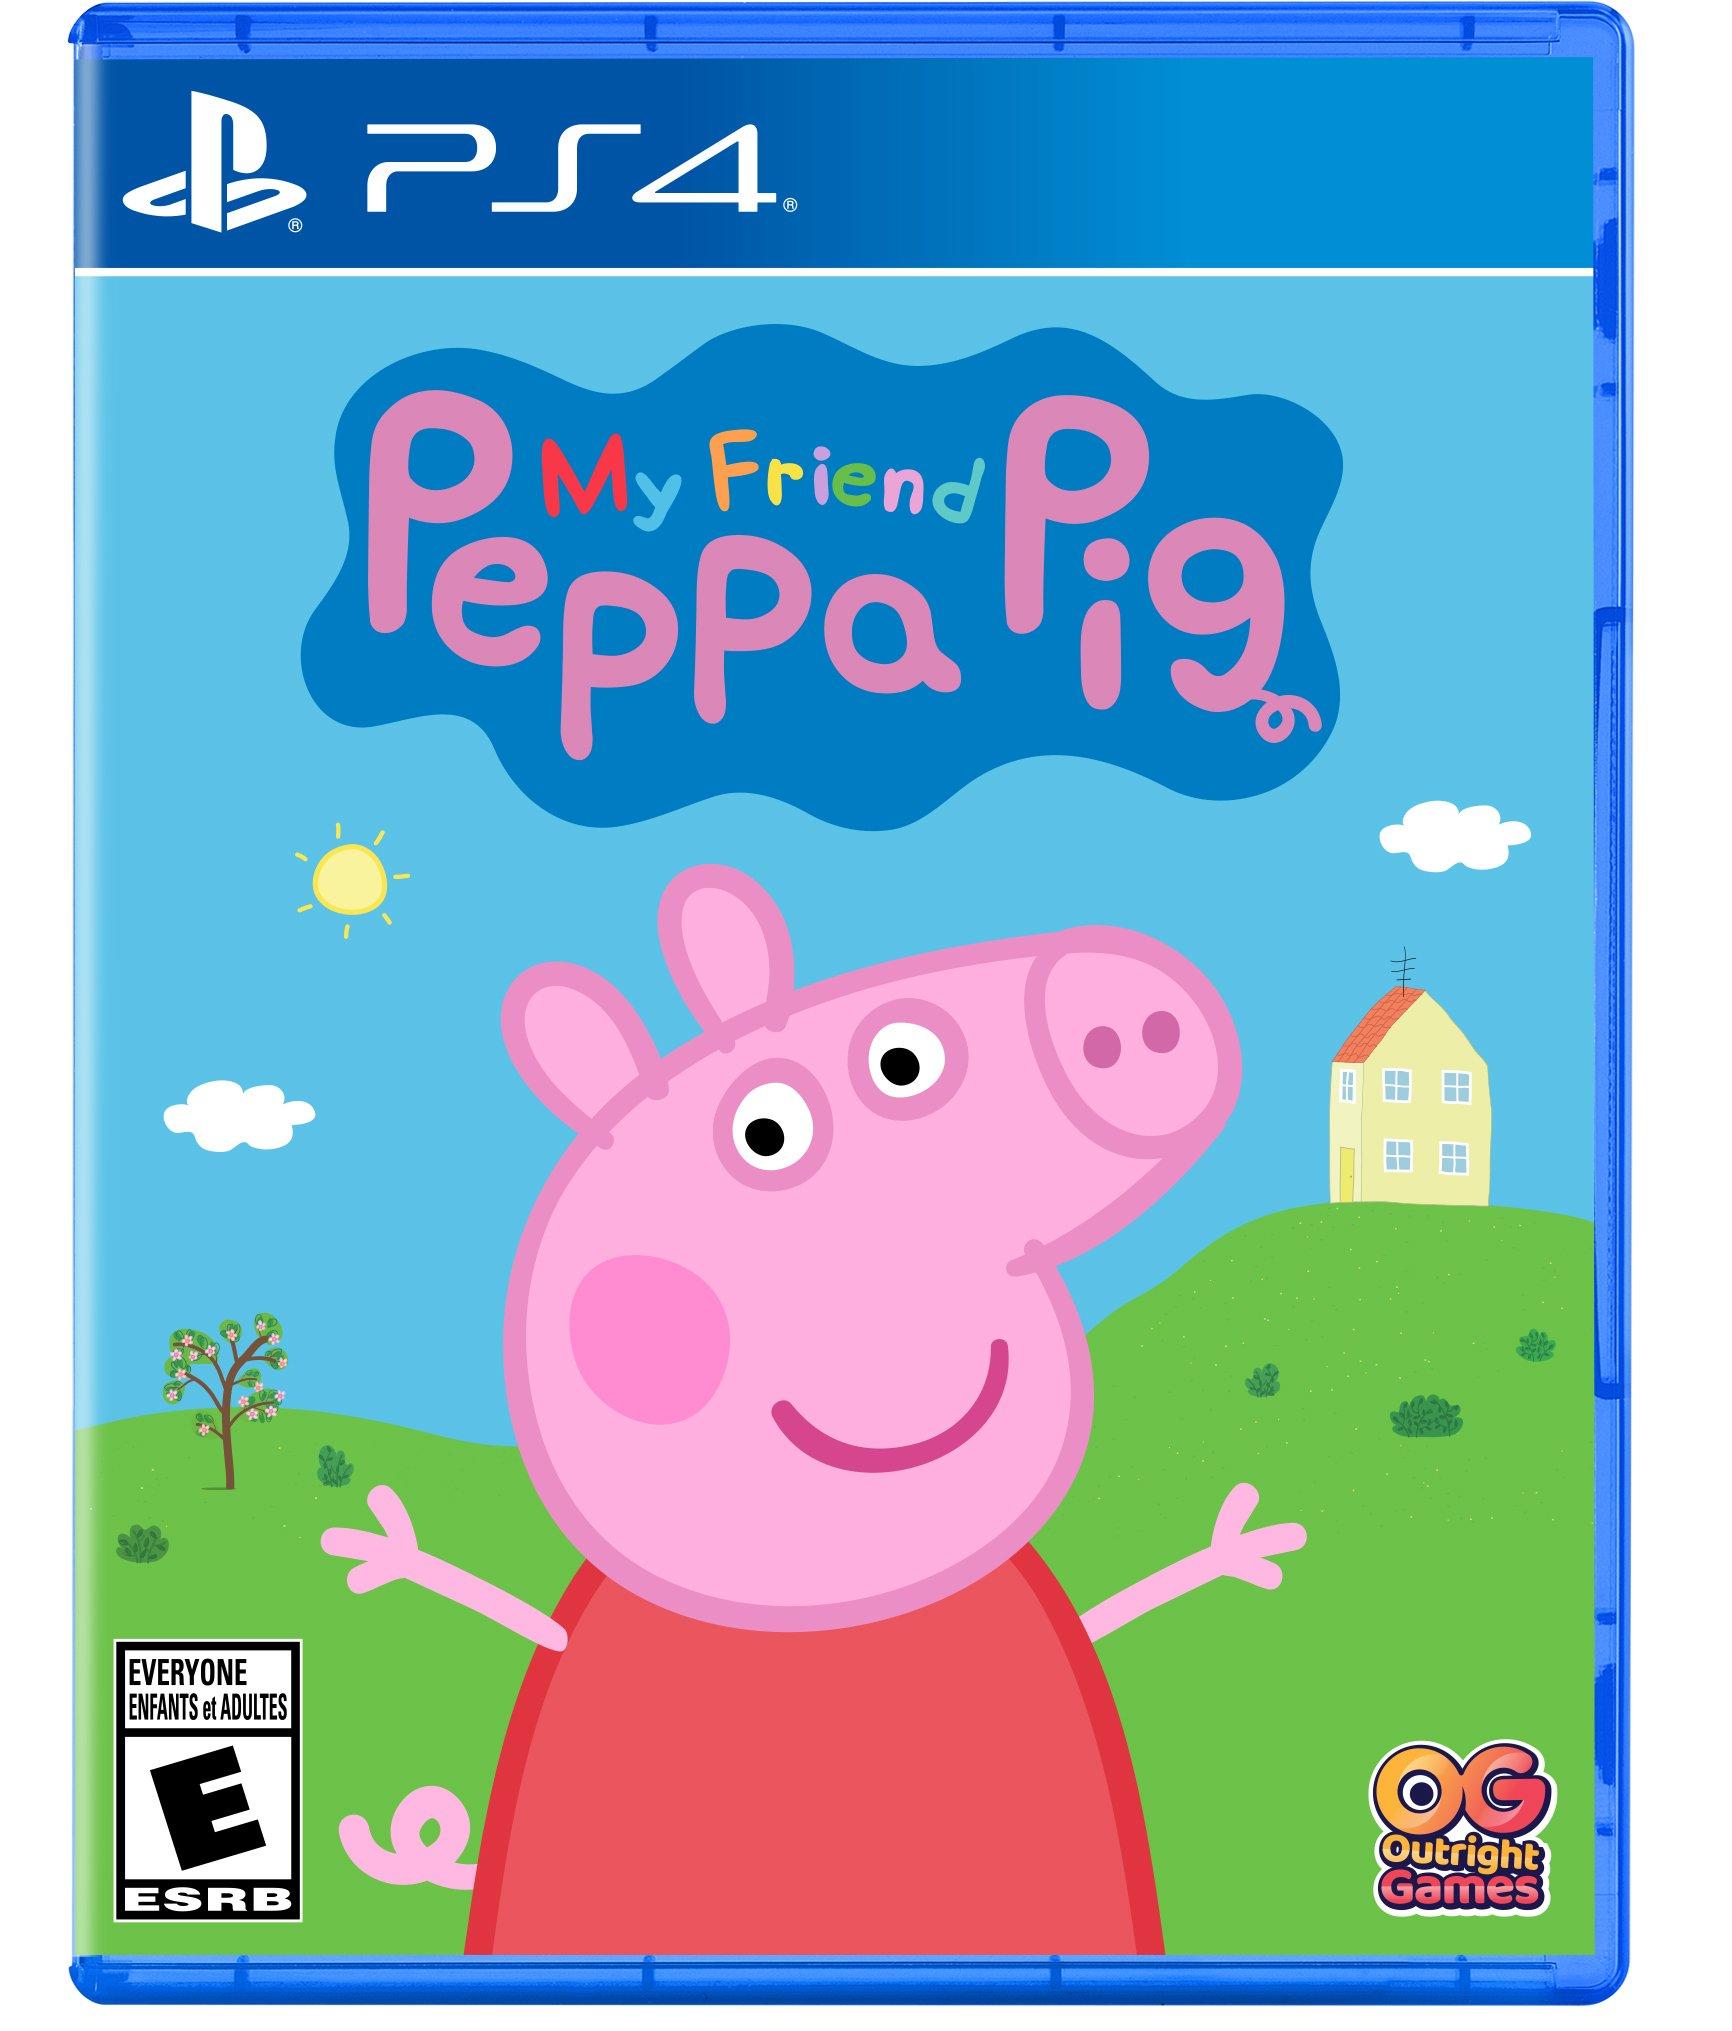  My Frend Peppa Pig Complete Edition- Nintendo Switch